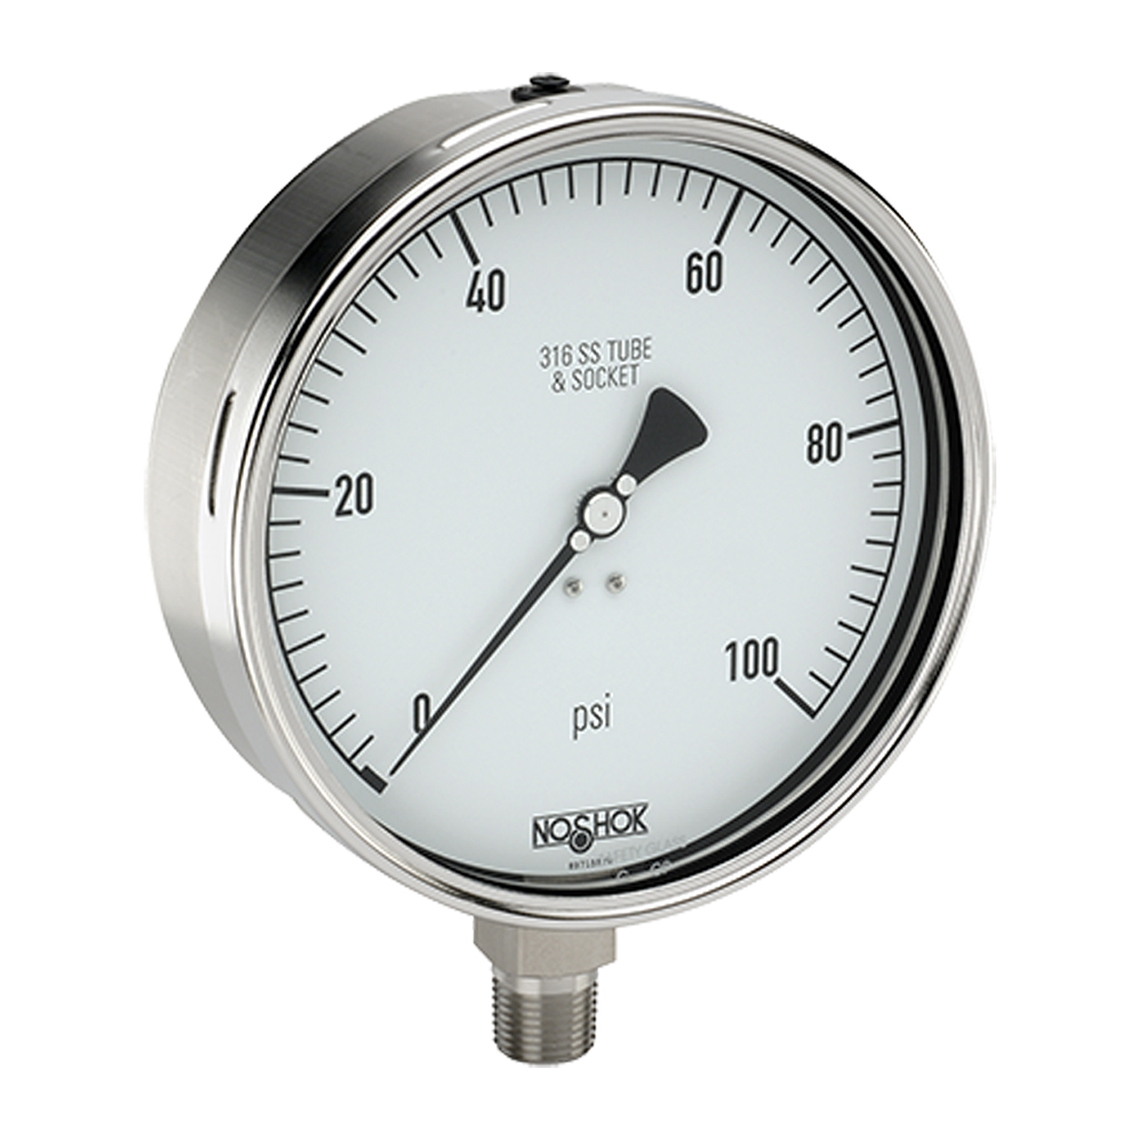 60-400-2000-psi/kg/cm2 400/500 Series All Stainless Steel Dry and Liquid Filled Pressure Gauges